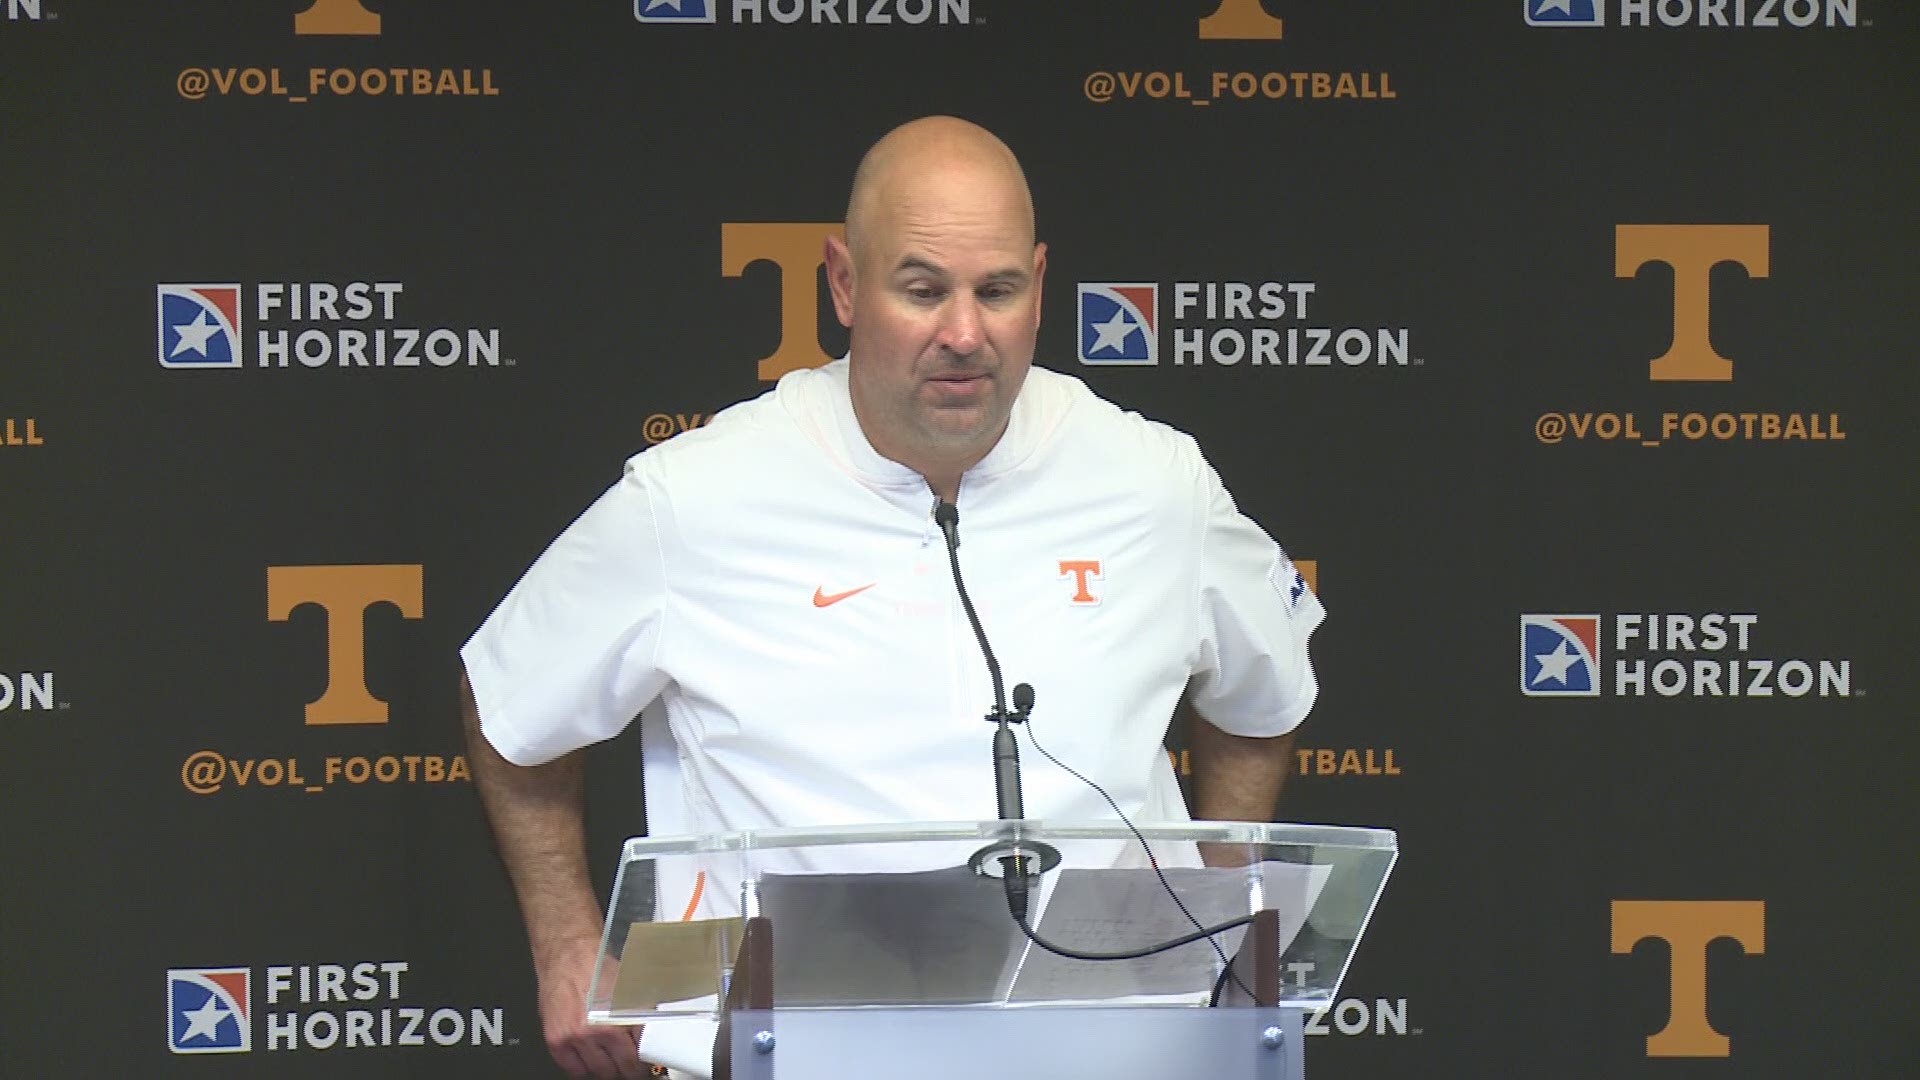 Jeremy Pruitt was proud of the way his team responded and impressed with the fans after a 41-21 win over South Carolina.